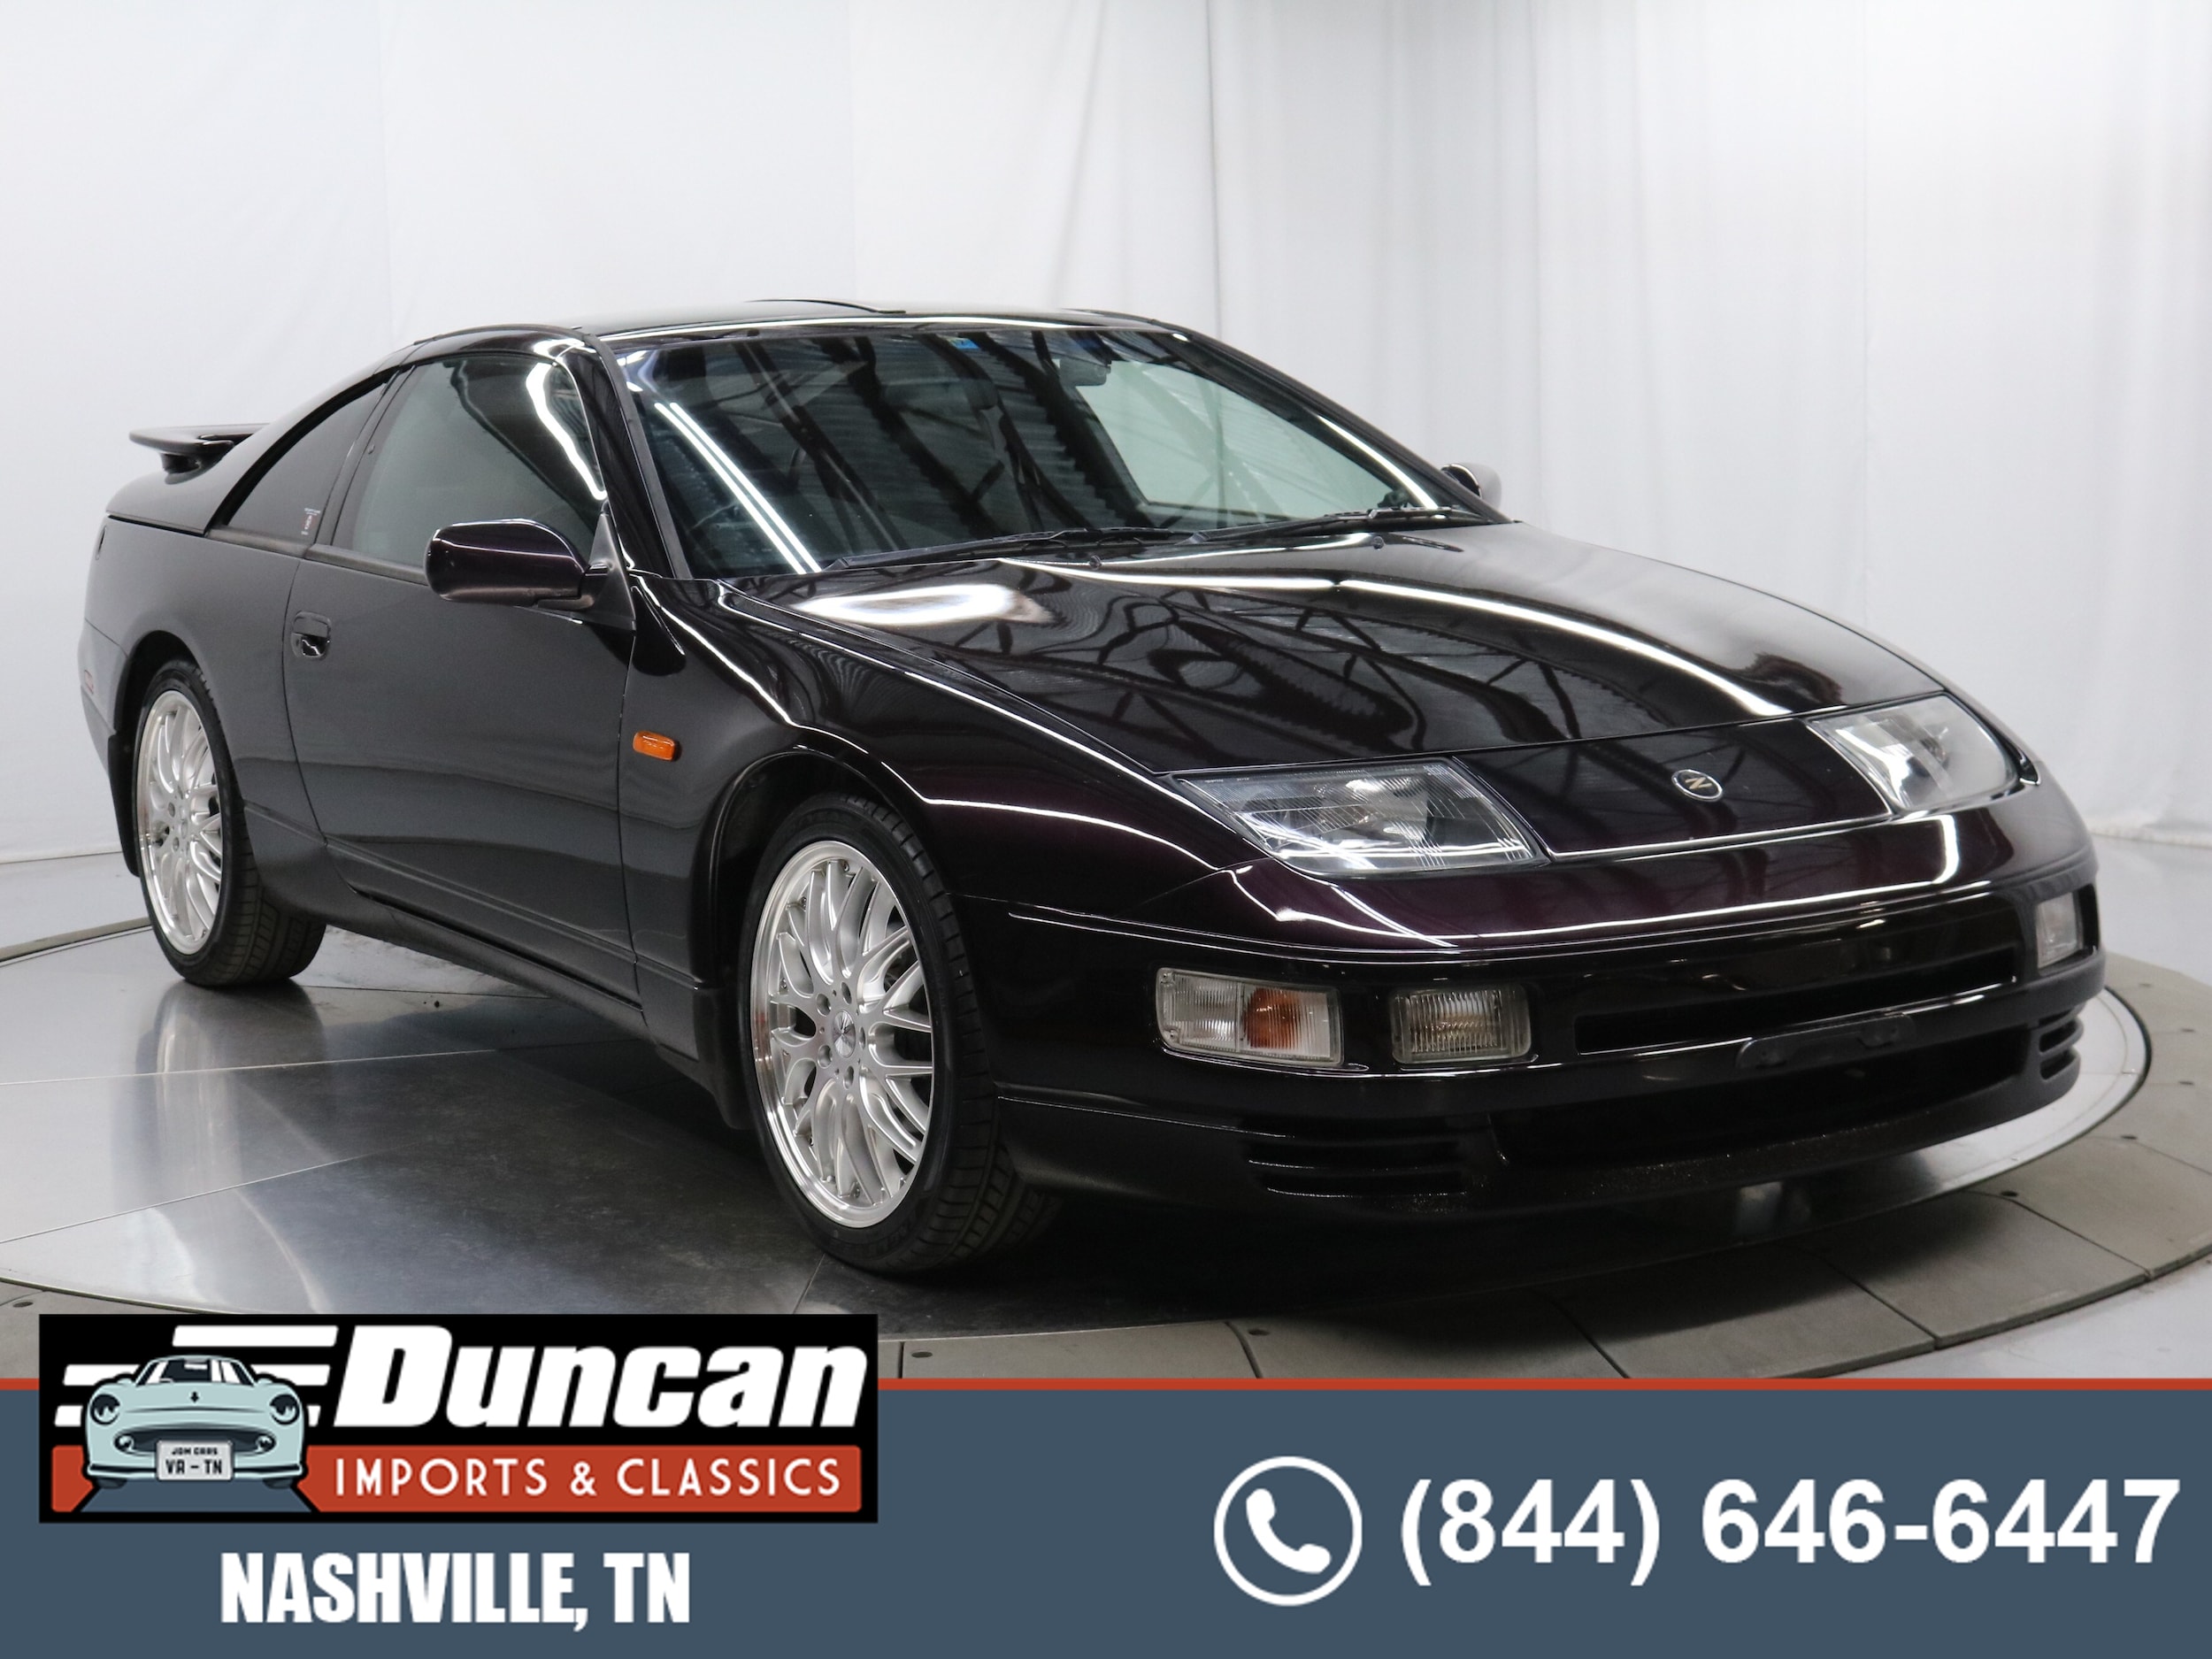 Used 1998 Nissan Fairlady Z 300ZX For Sale at Duncan Imports and 